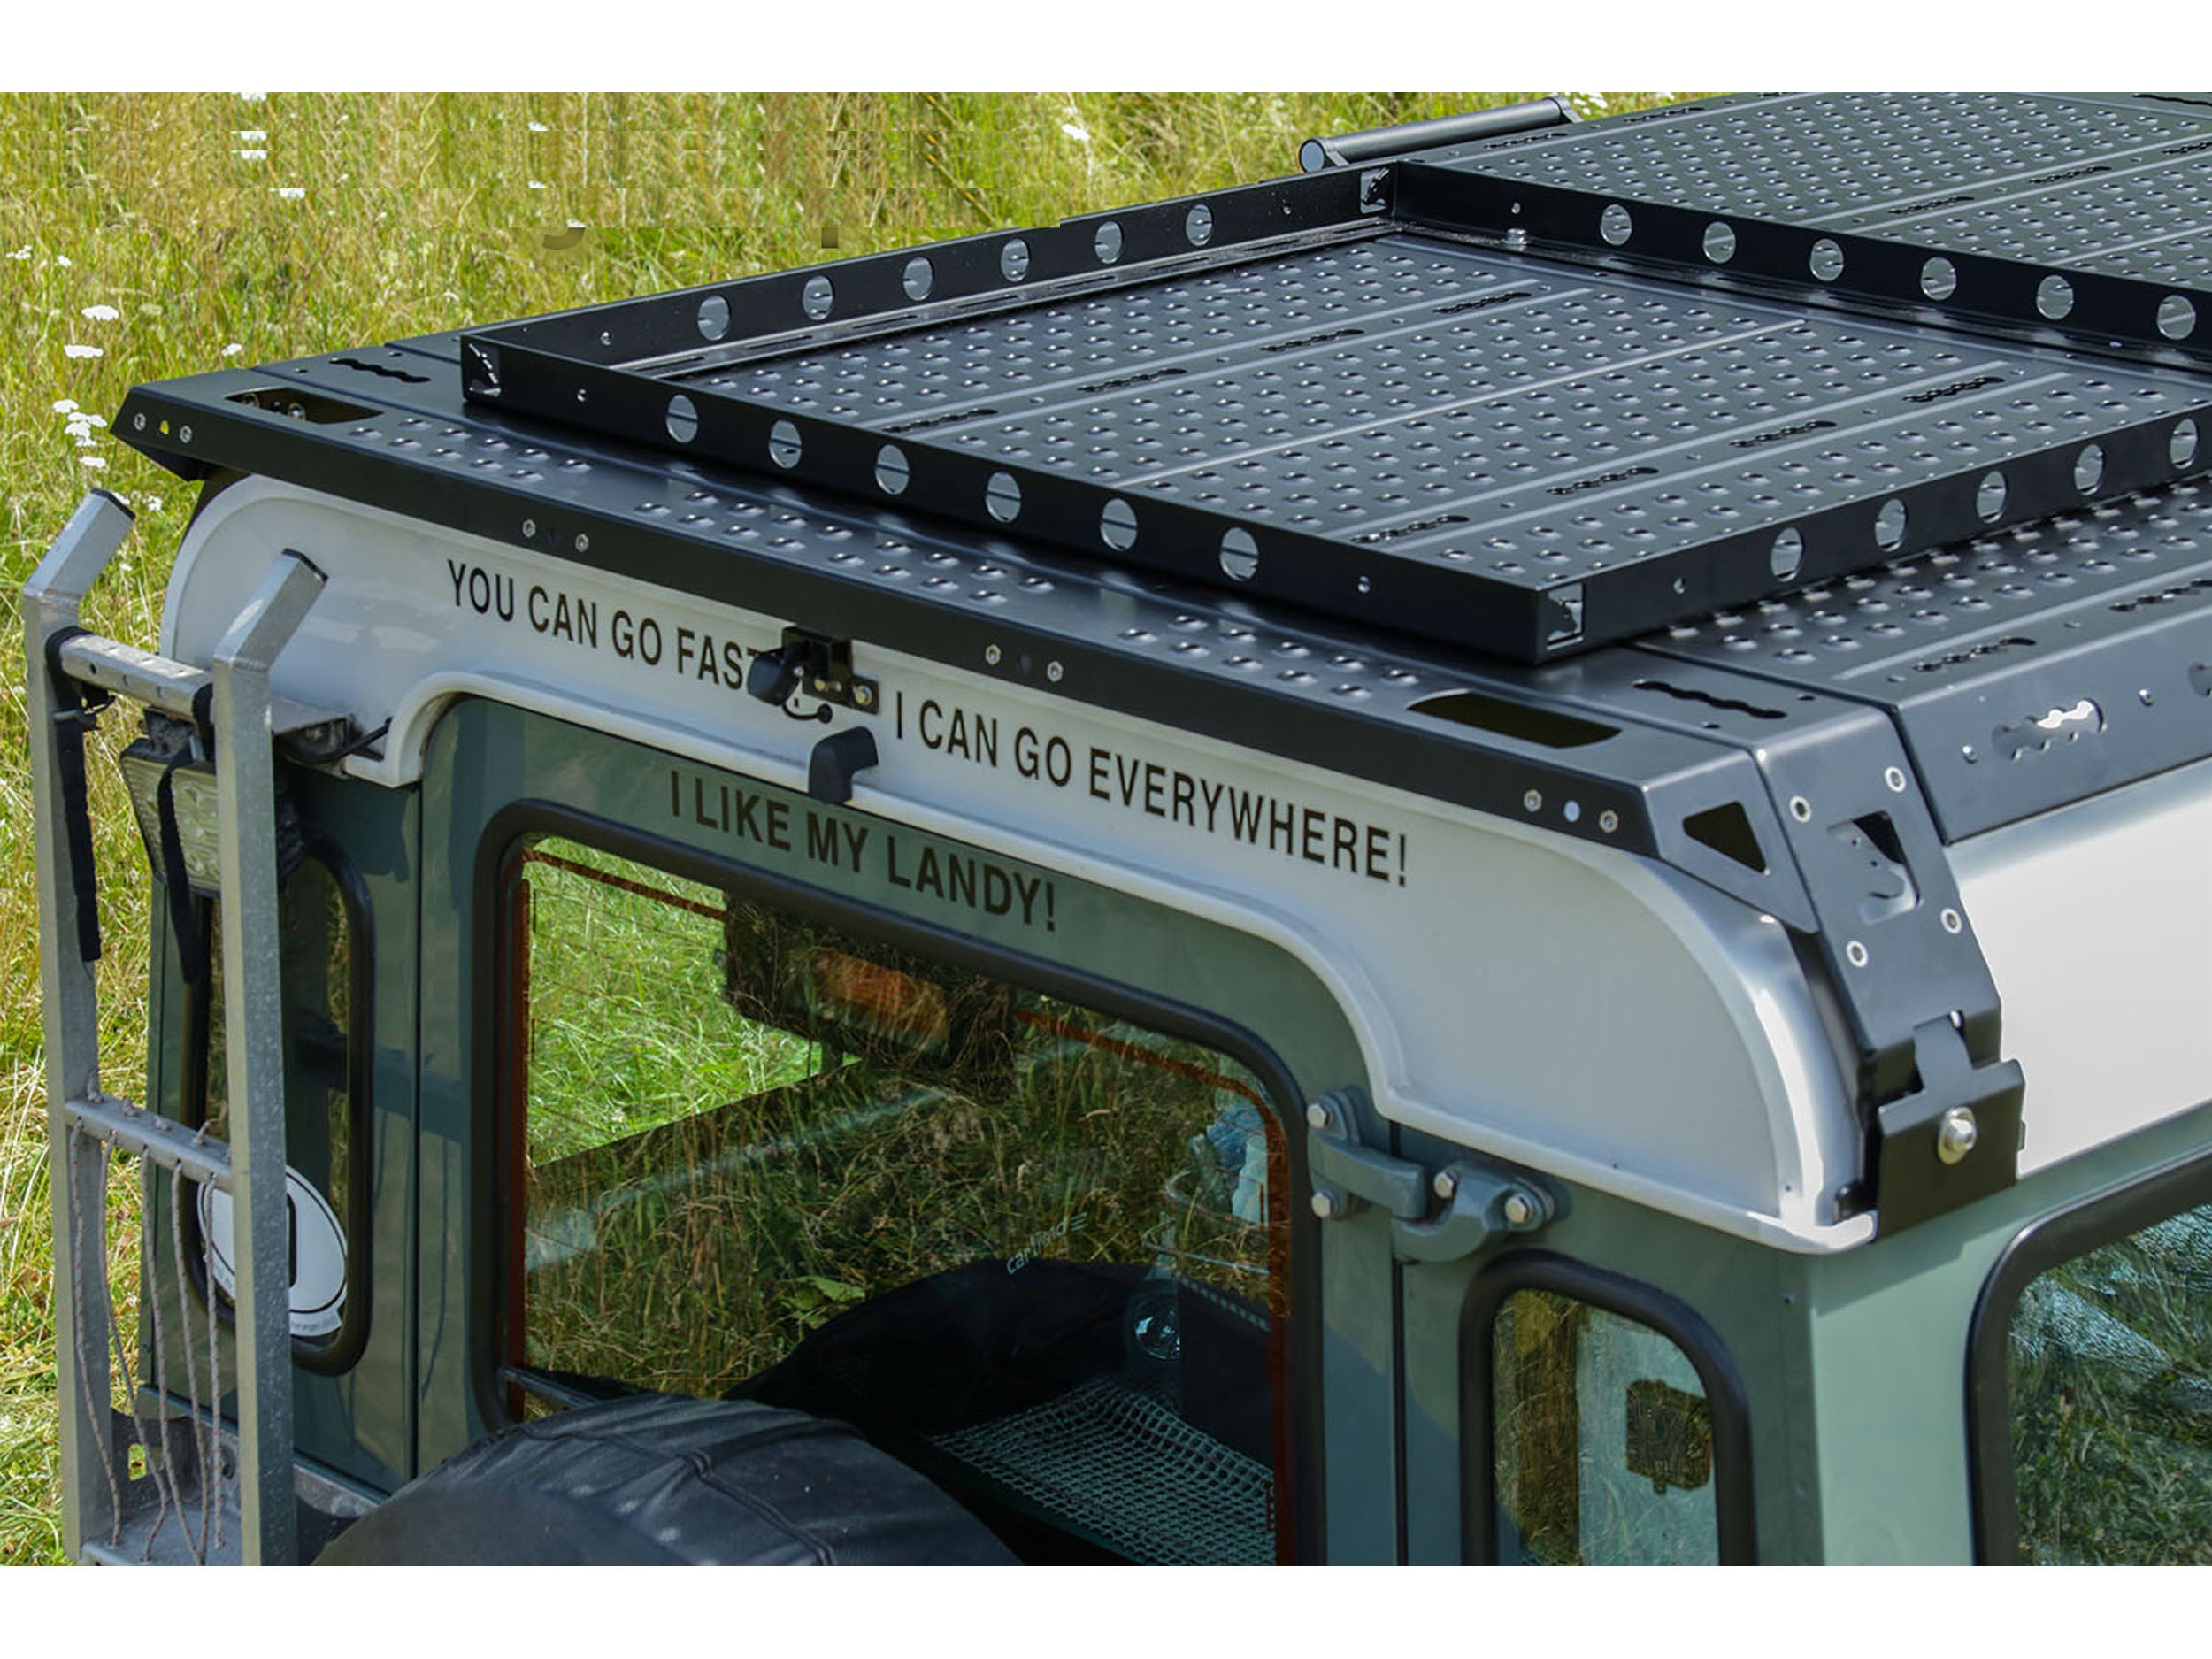 CargoBear Roof Rack - Quick-Mounting Tent Frame